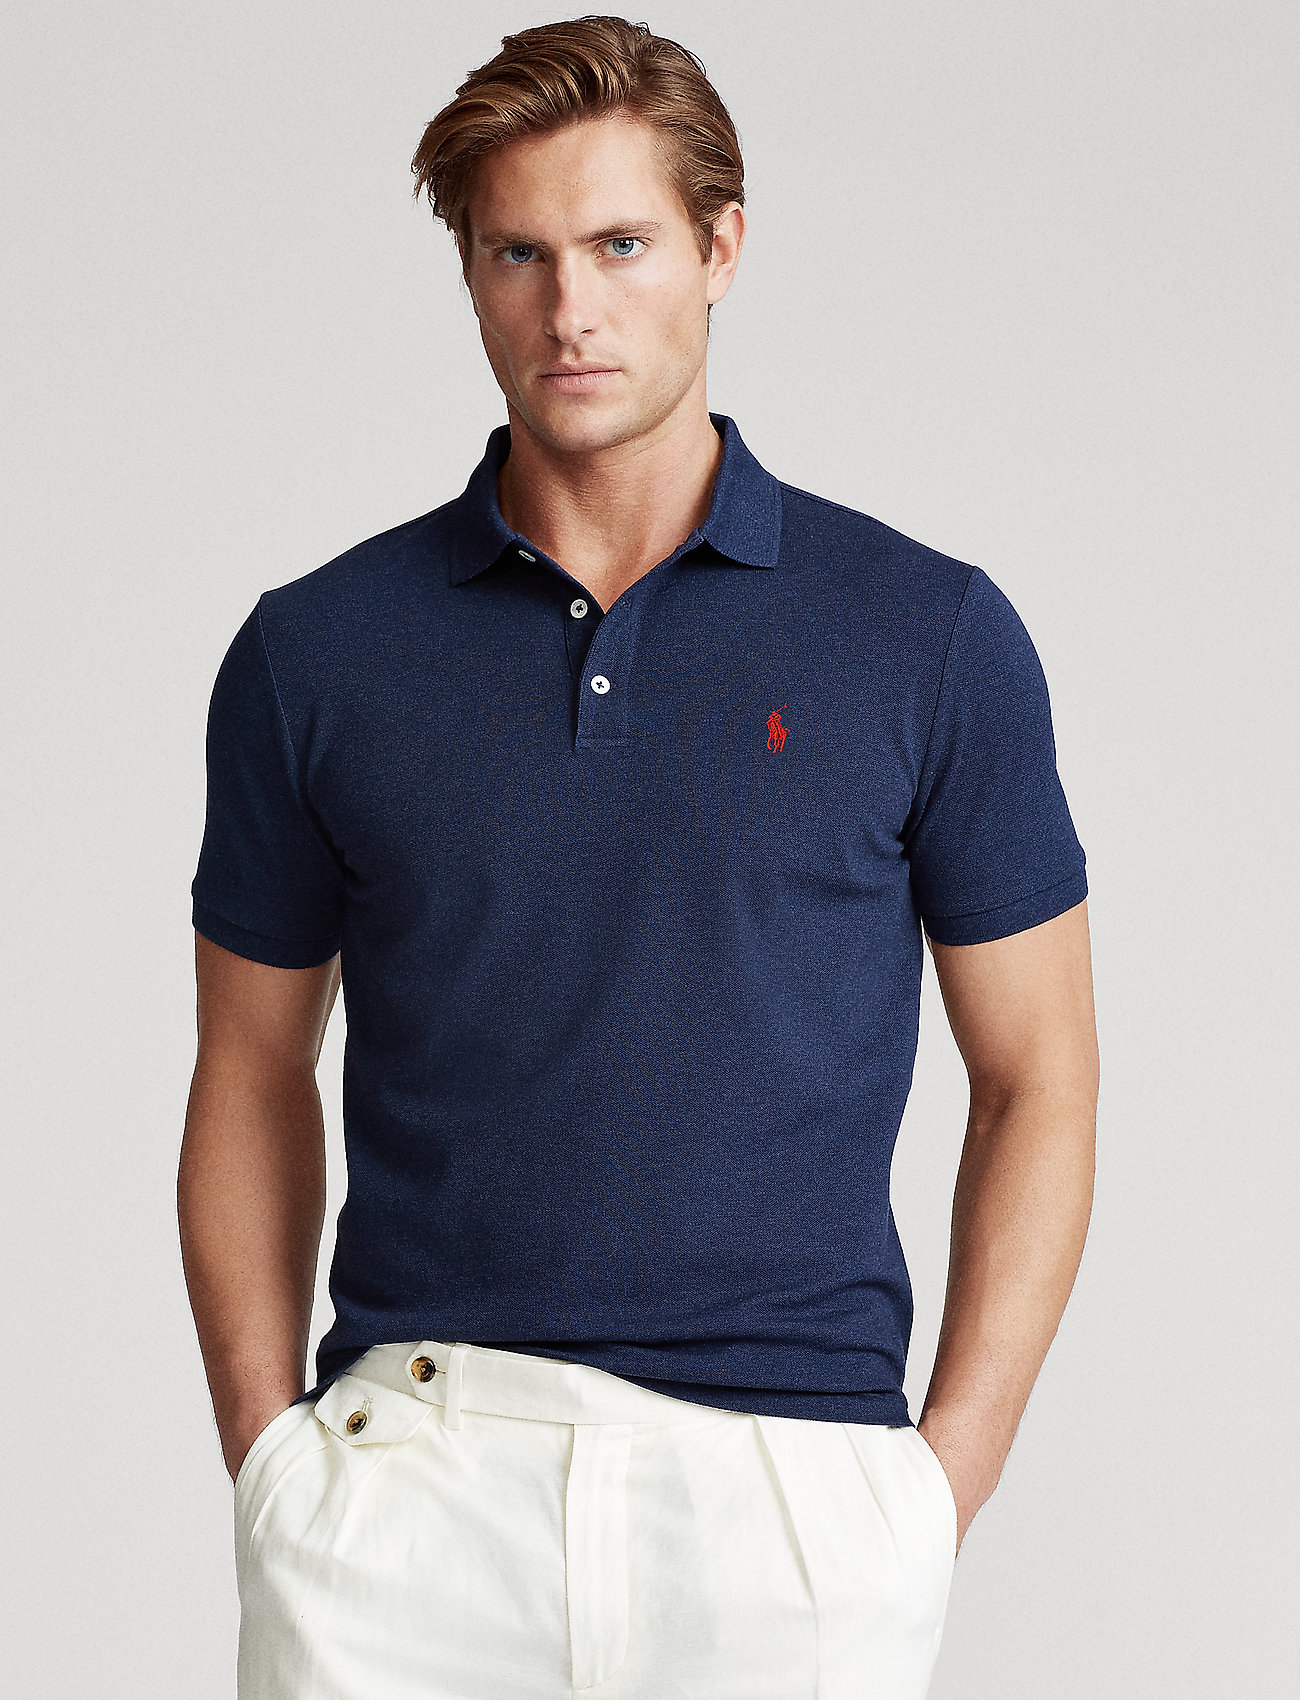 Polo Ralph Lauren Slim Fit Stretch Mesh Polo - Short-sleeved polos ...